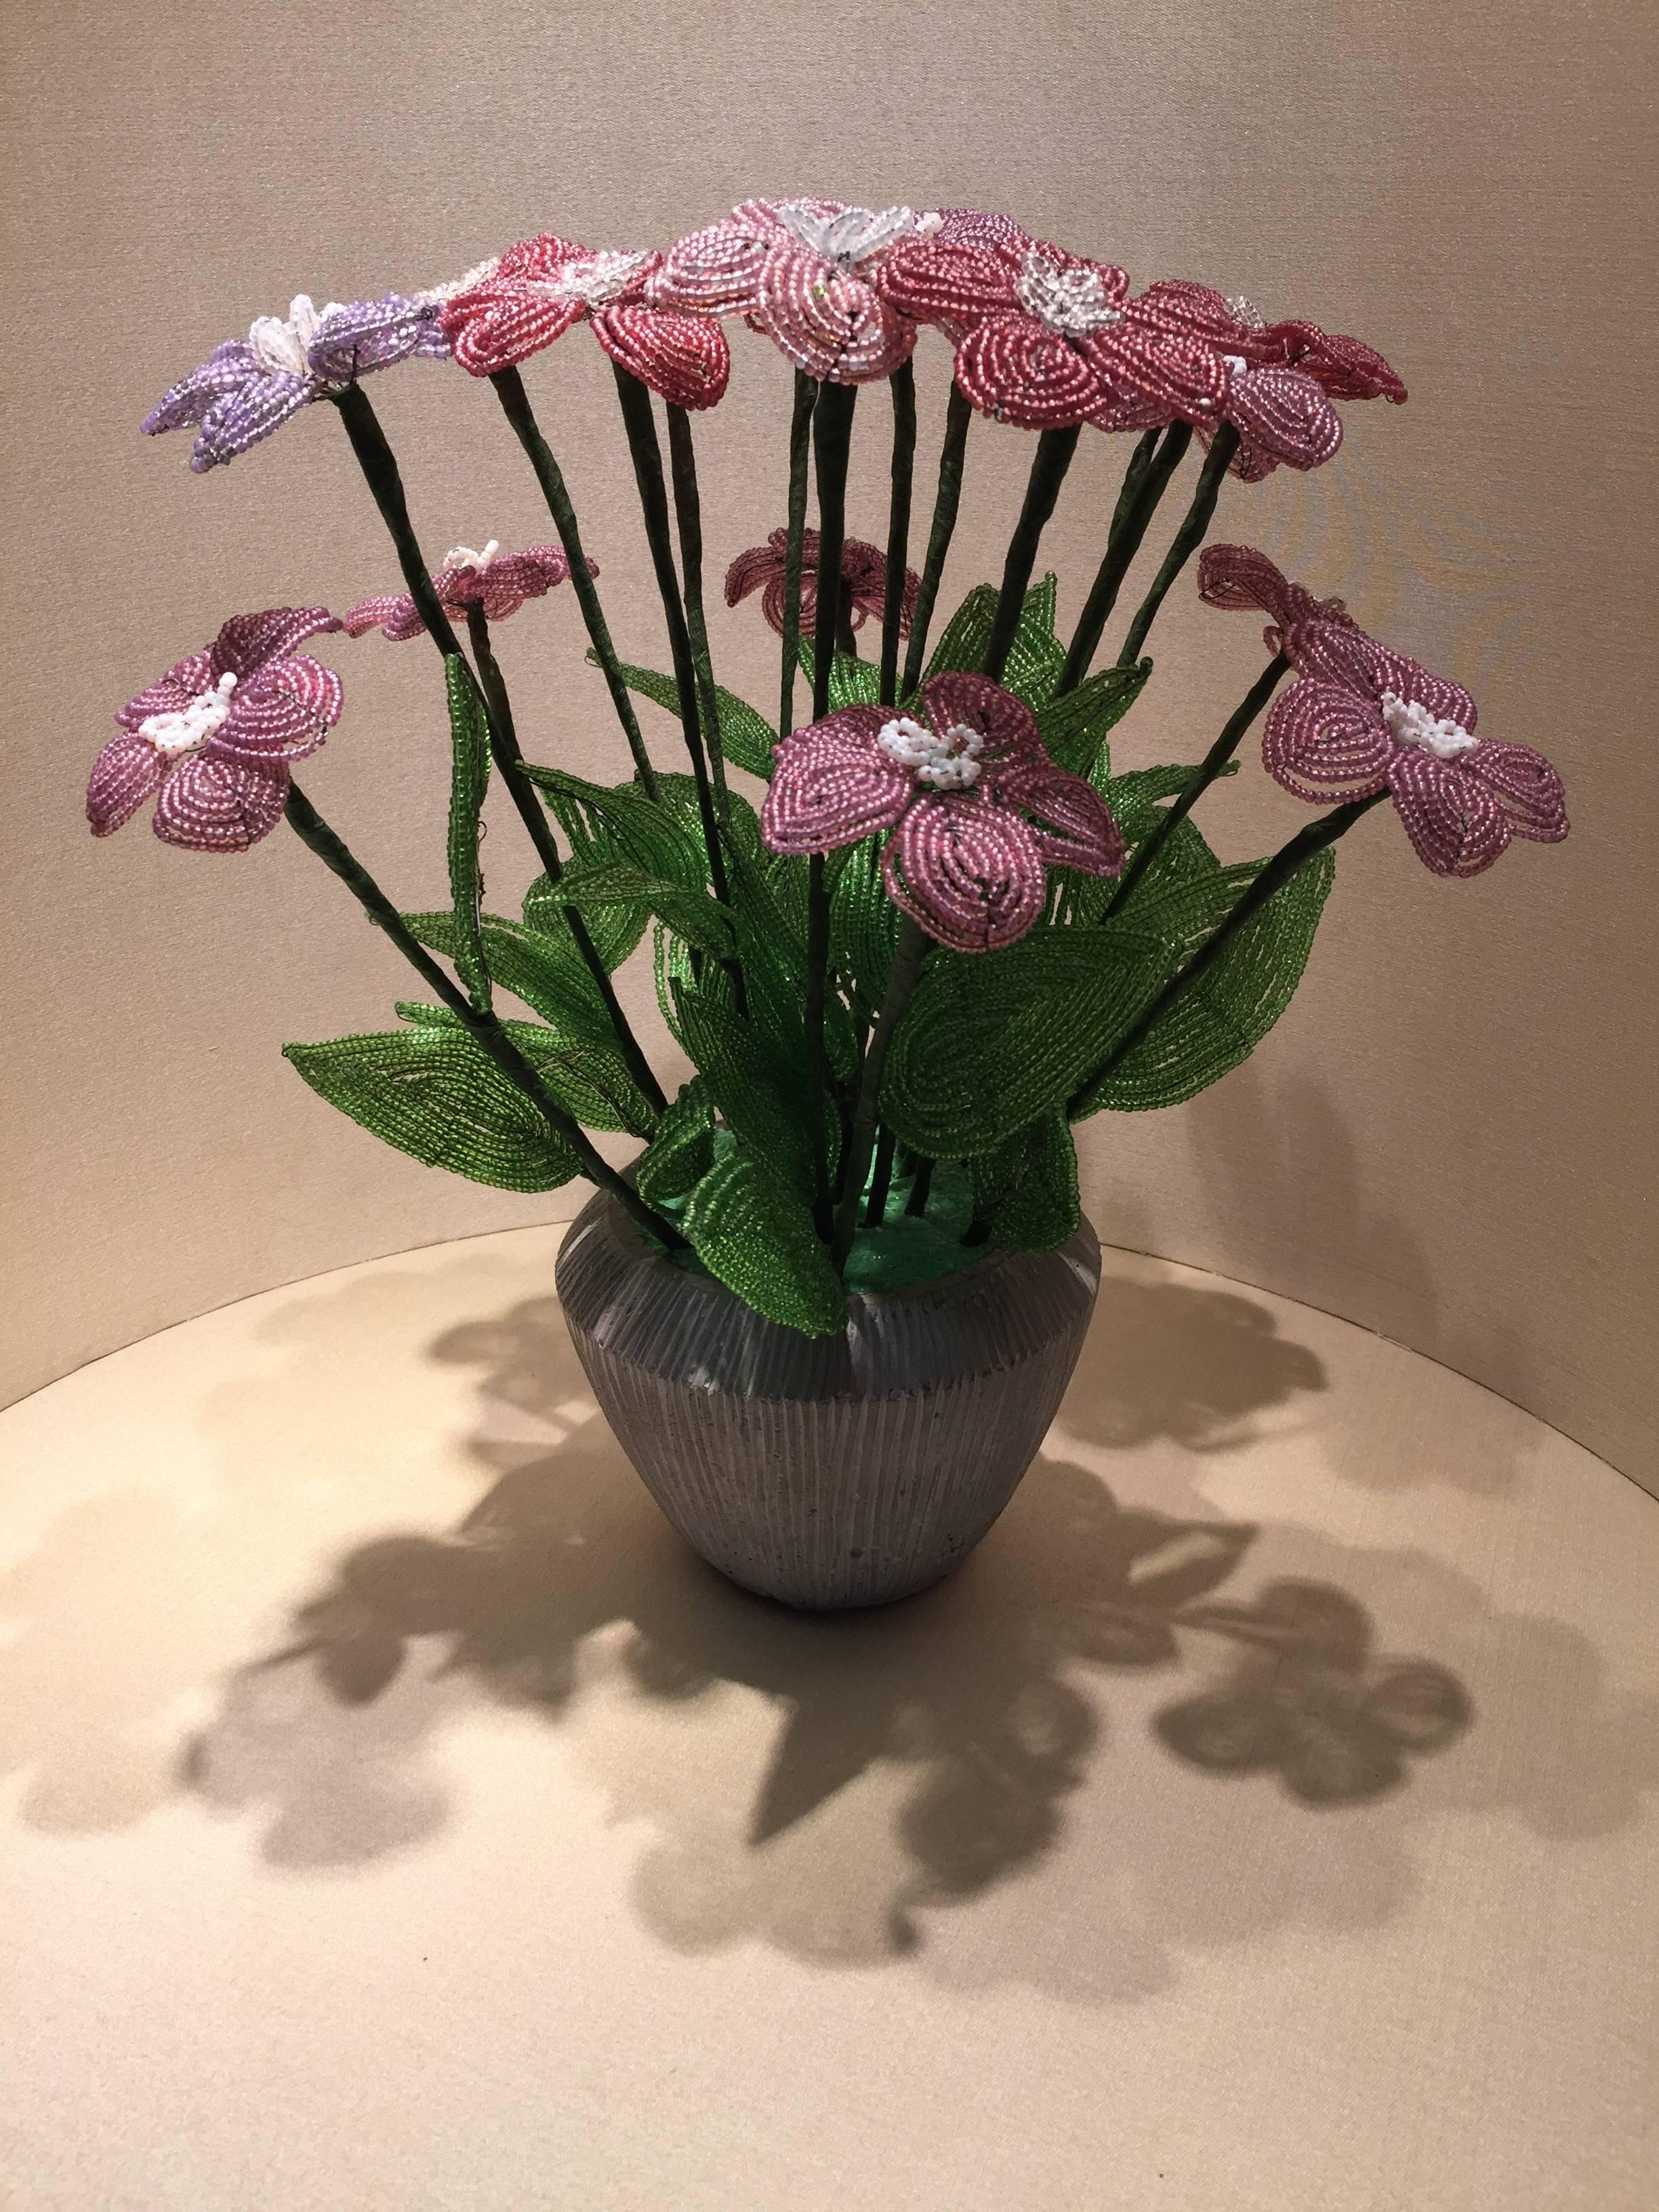 Beautiful beaded flowers put in a contemporary pot with grit bonded glass made early 20th century.